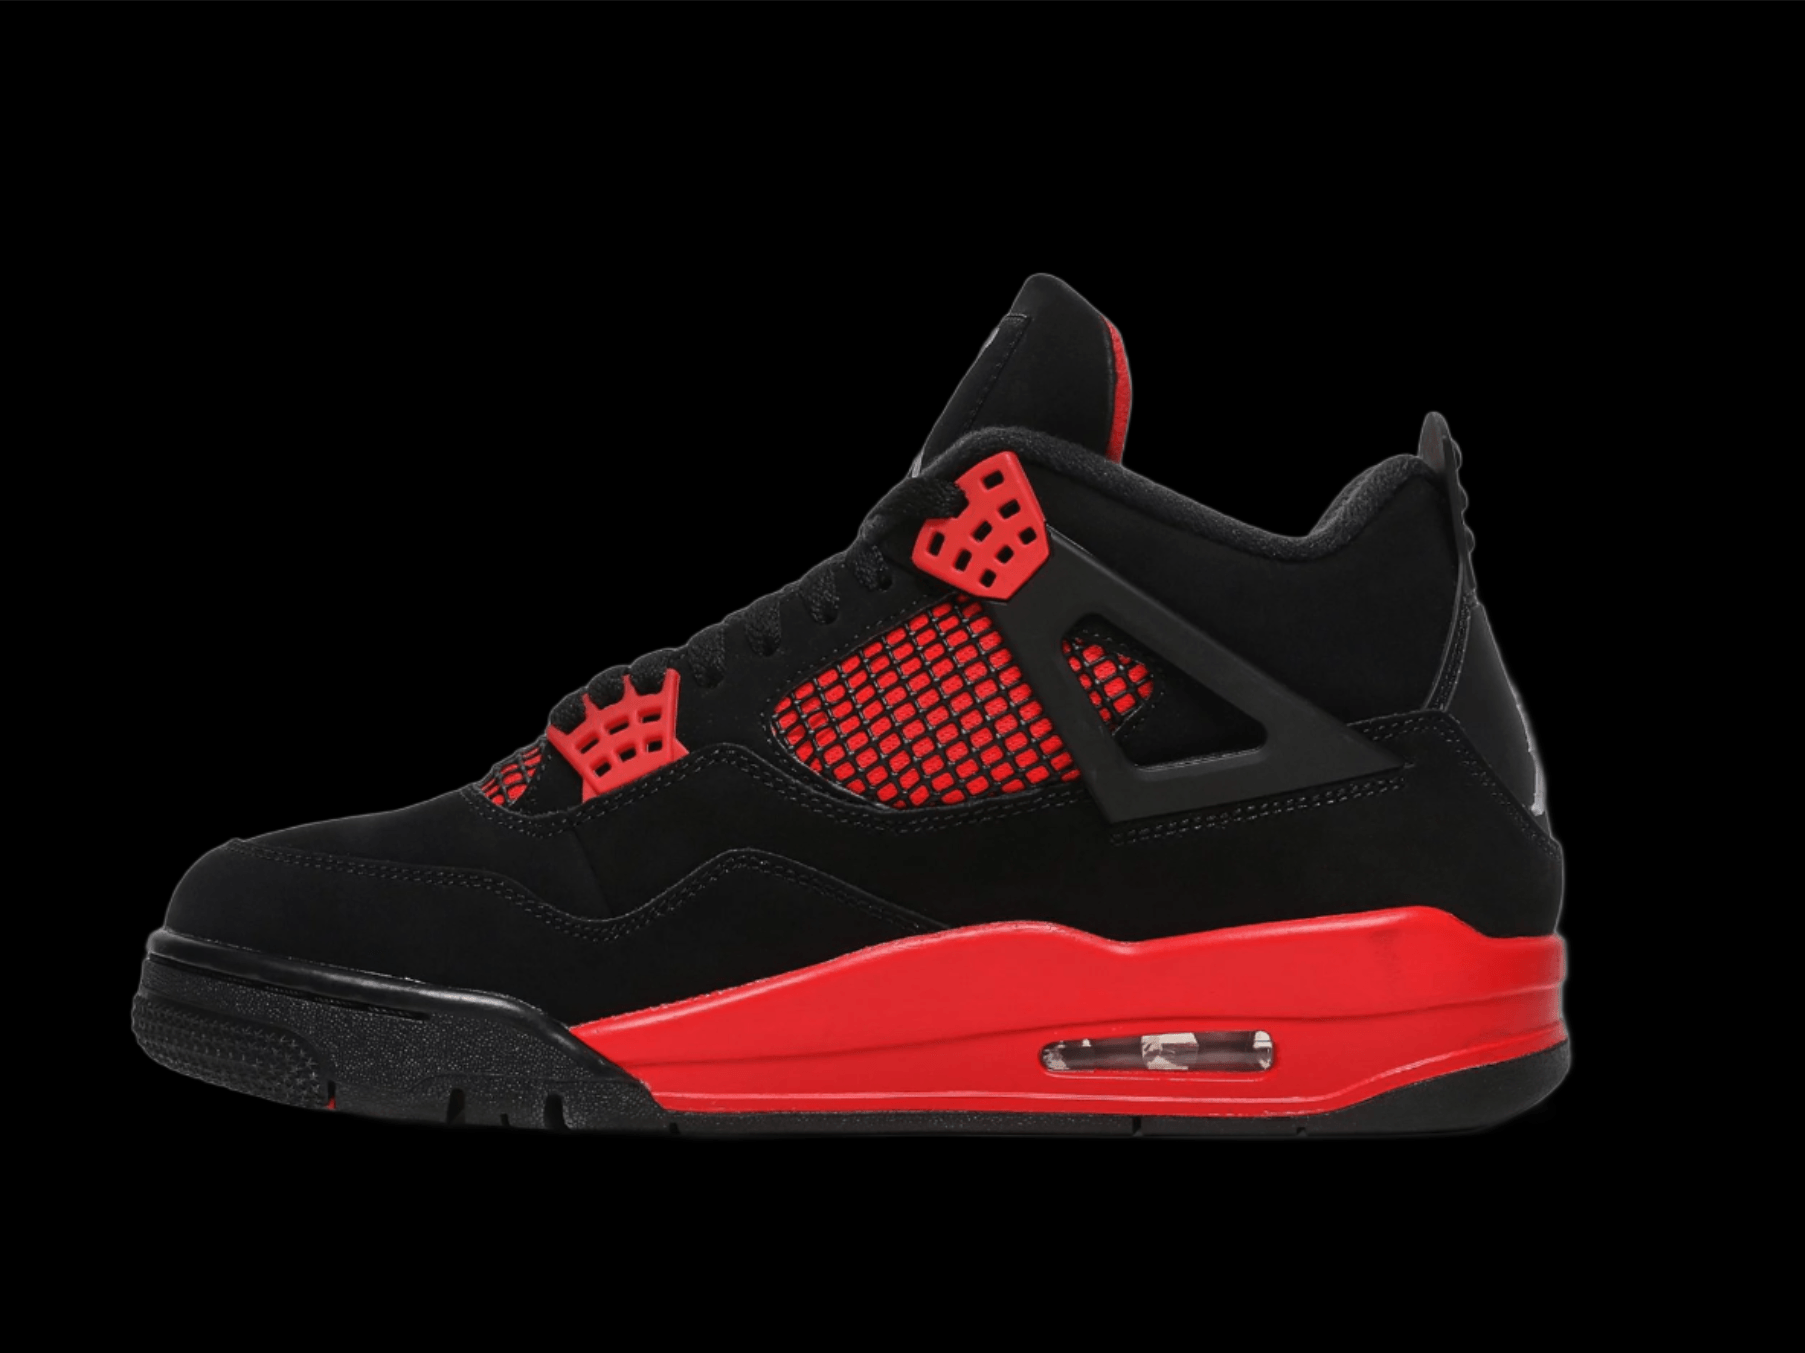 NIKE AIR JORDAN 4 RED THUNDER | The Flaire